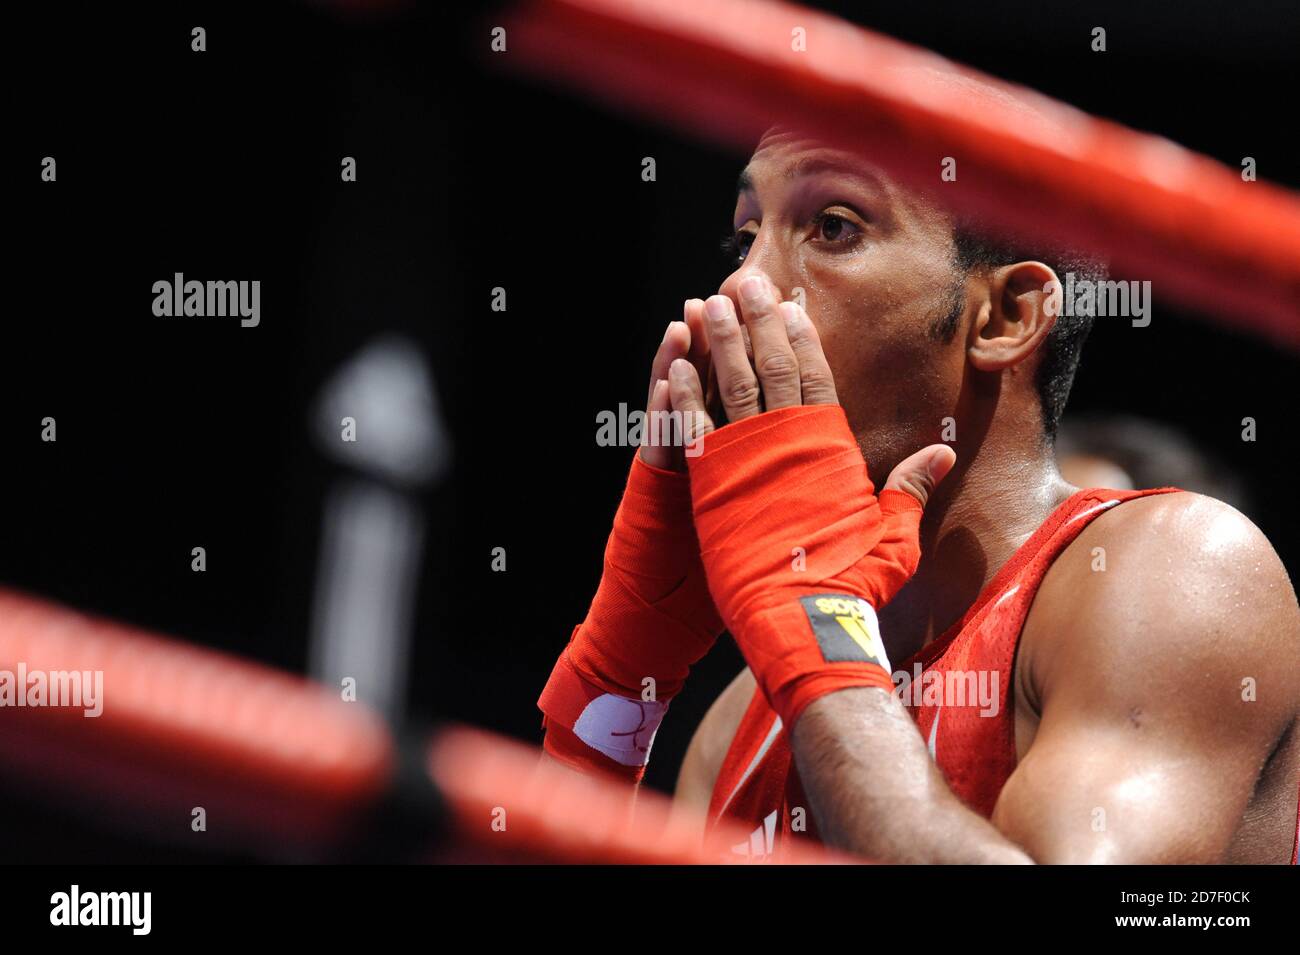 Boxer at the ring's corner waiting for the verdict, during an amateur boxing match of the AIBA World Boxing Champioship in Milan 2009. Stock Photo